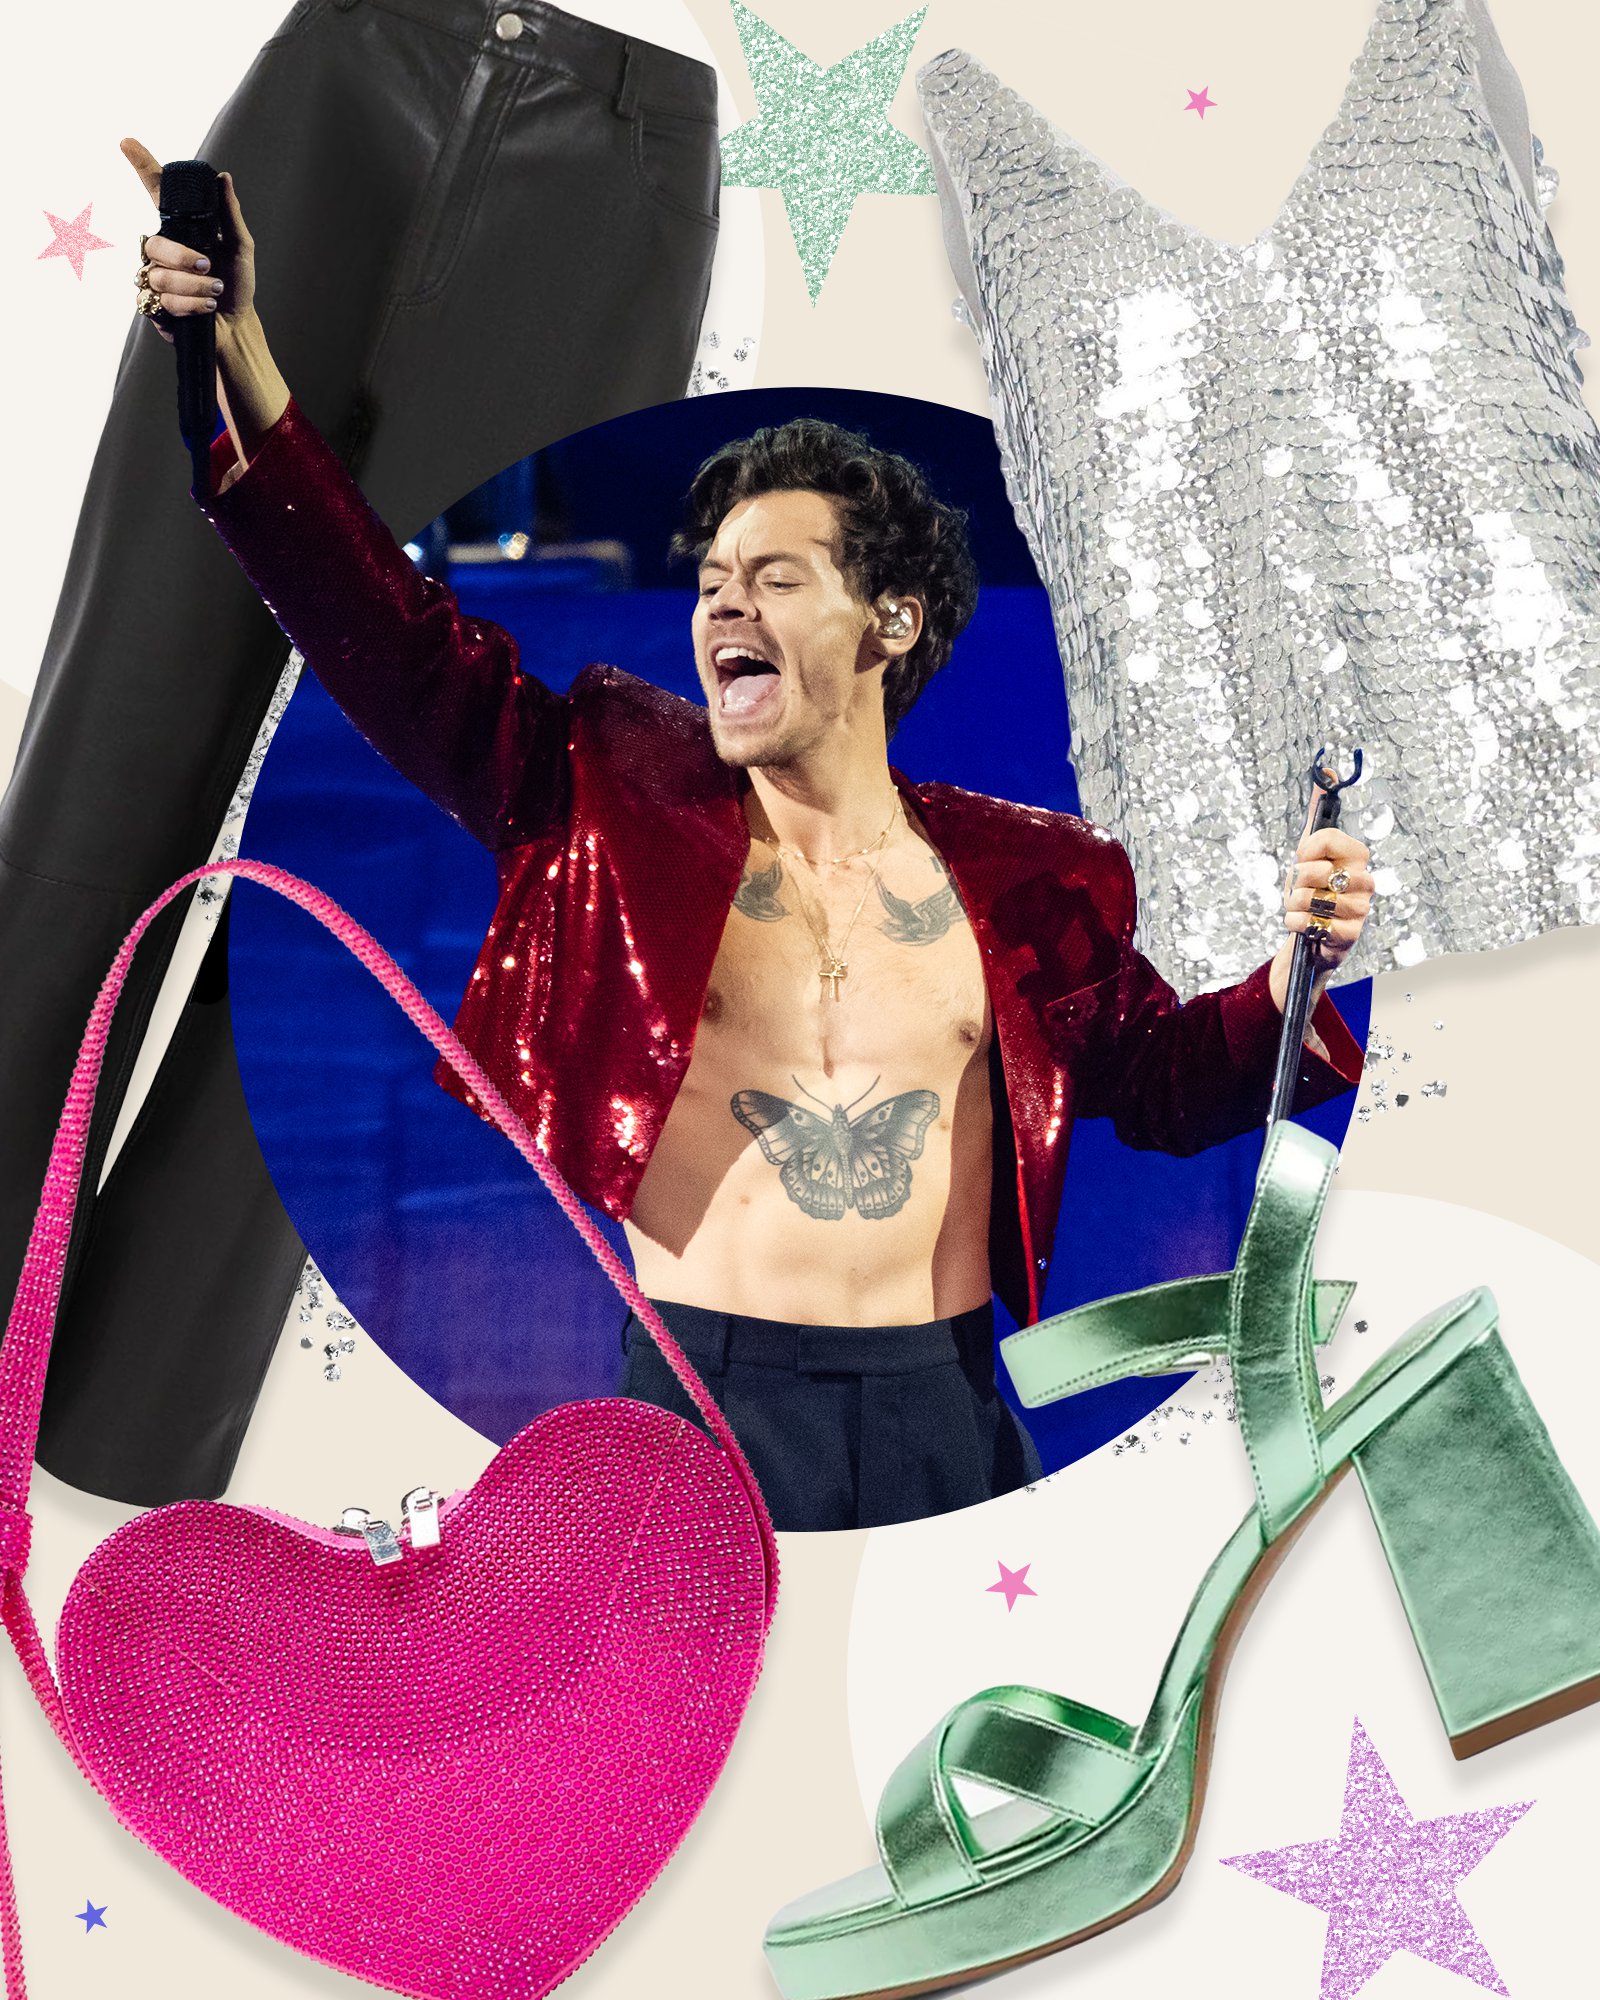 Harry Styles Concert Outfit Ideas If You’ve Won The *Golden* Ticket